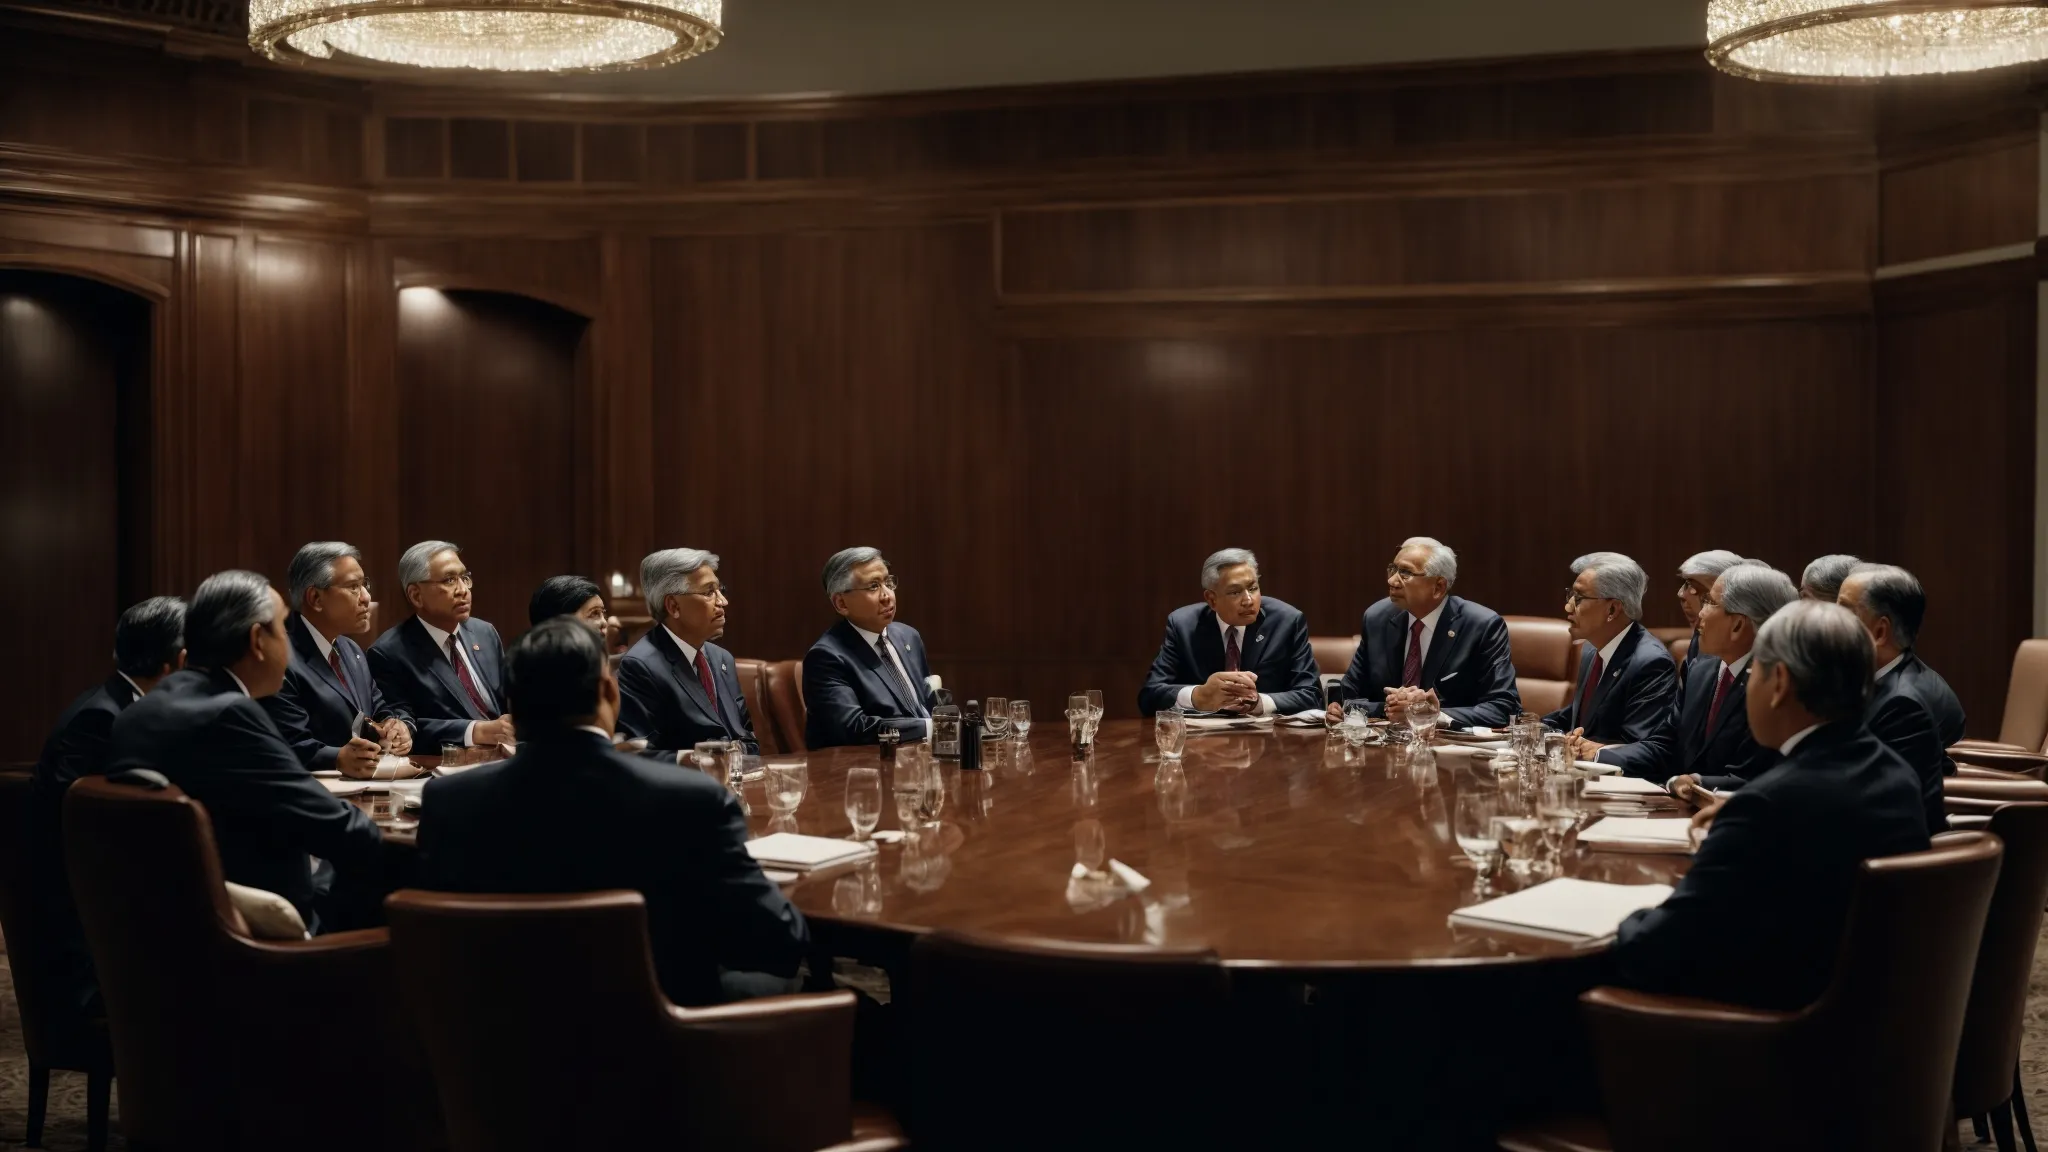 a group of dignitaries seated around a large table, earnestly discussing in a high-profile international meeting.